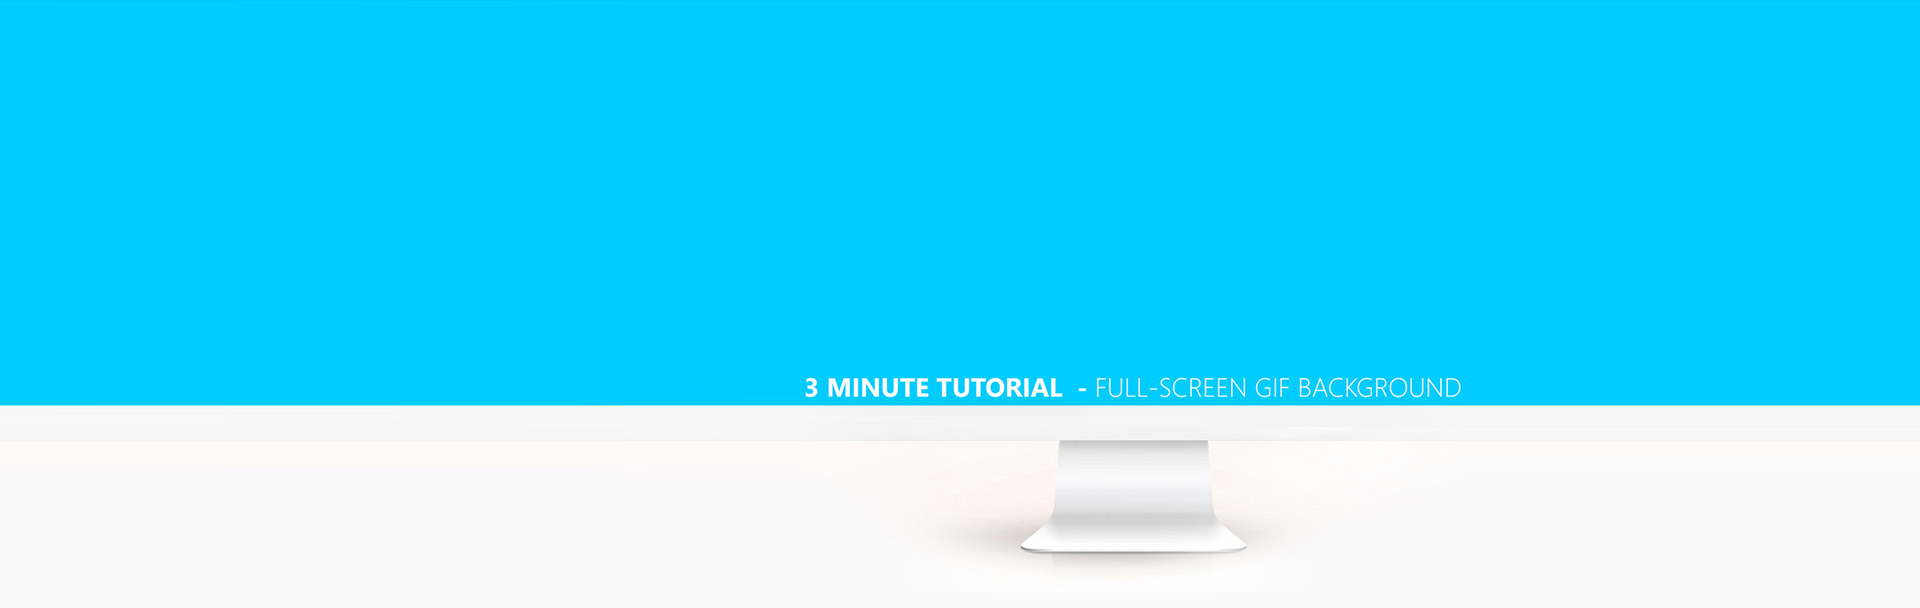 Make A Fullscreen Background Gif Or Image Using Only Css3